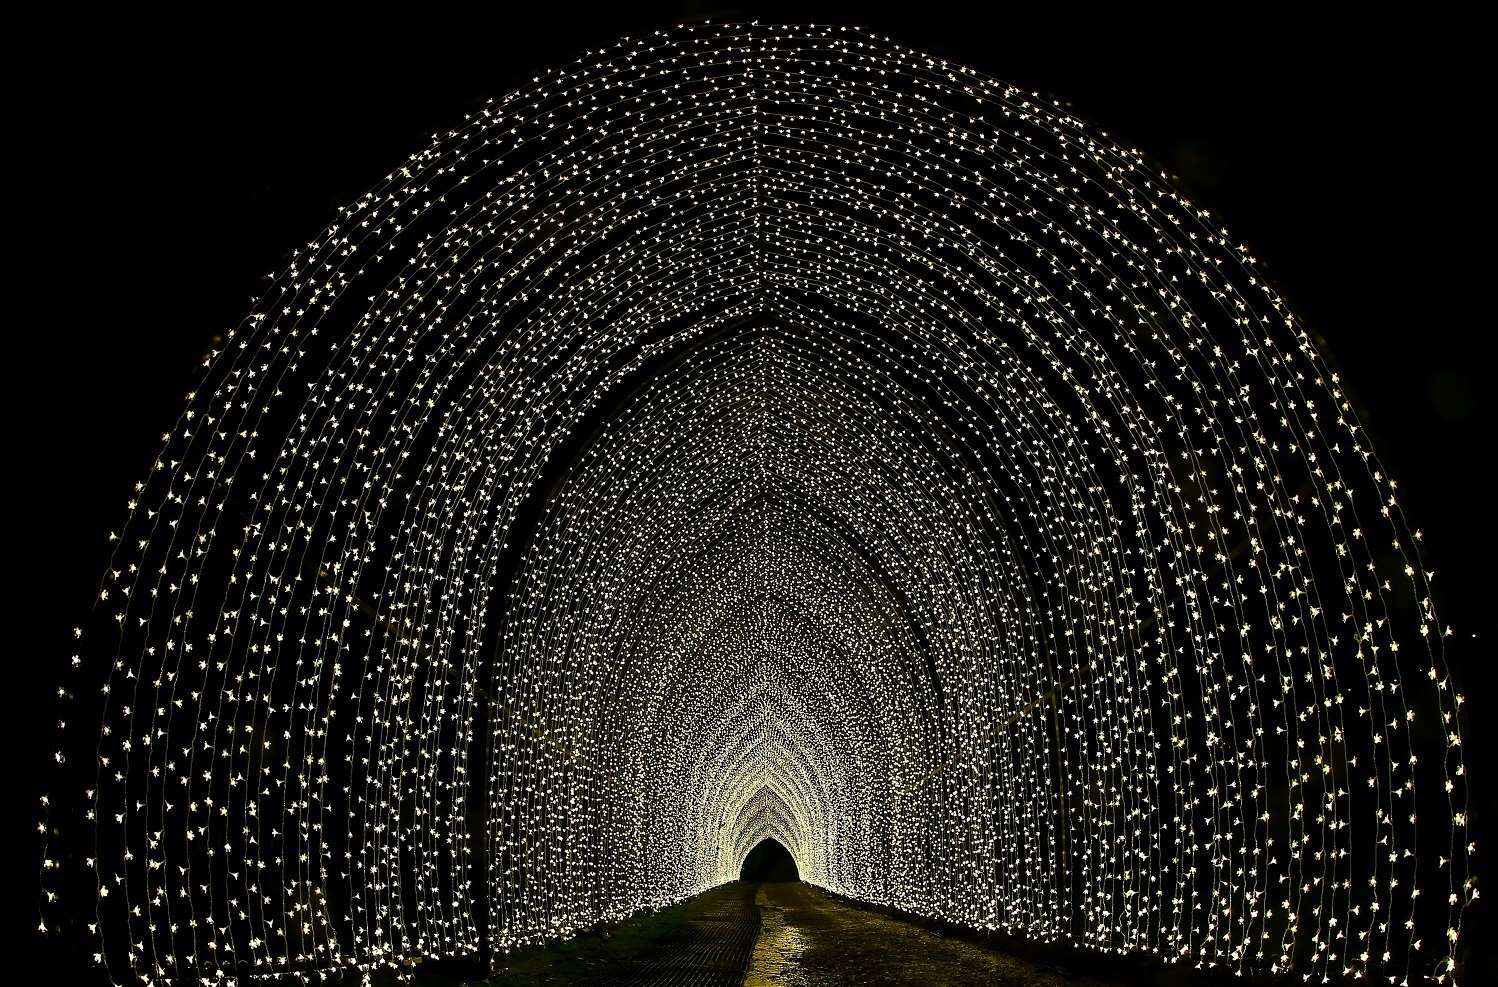 The Tunnel of Light at Christmas at Bedgebury Picture: Matt Bristow